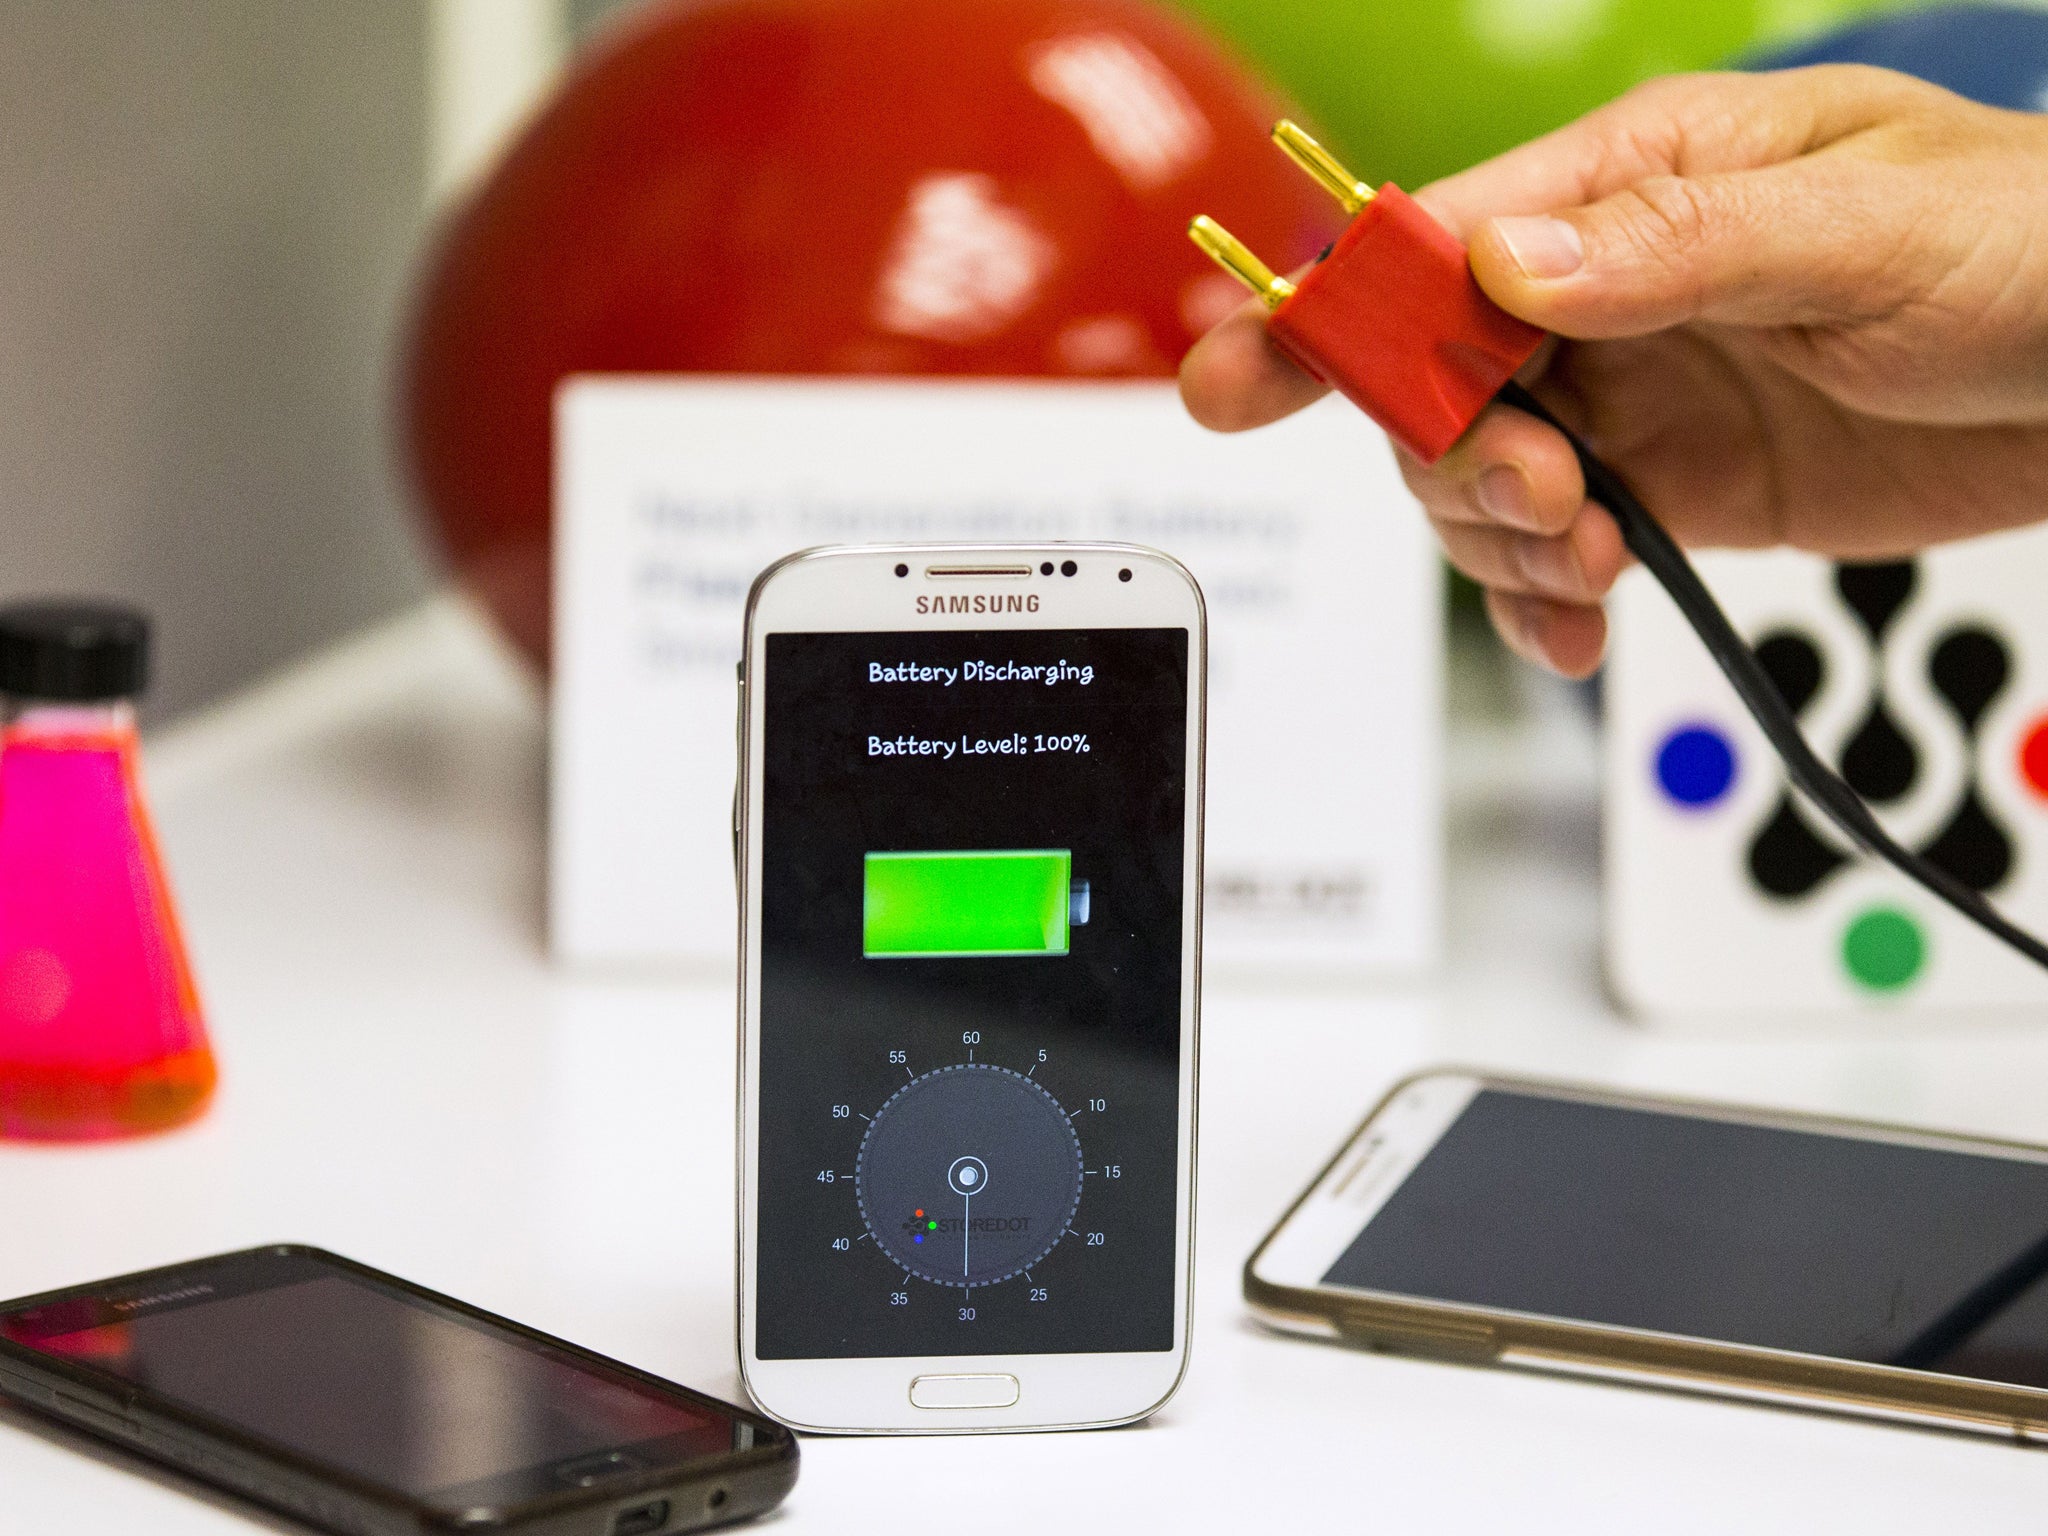 A member of the Israeli startup StoreDot demonstrates a bio-organic charger system which they are developing that can recharge a smartphone battery in just 30 seconds at their laboratory in the Tel Aviv on April 9, 2014